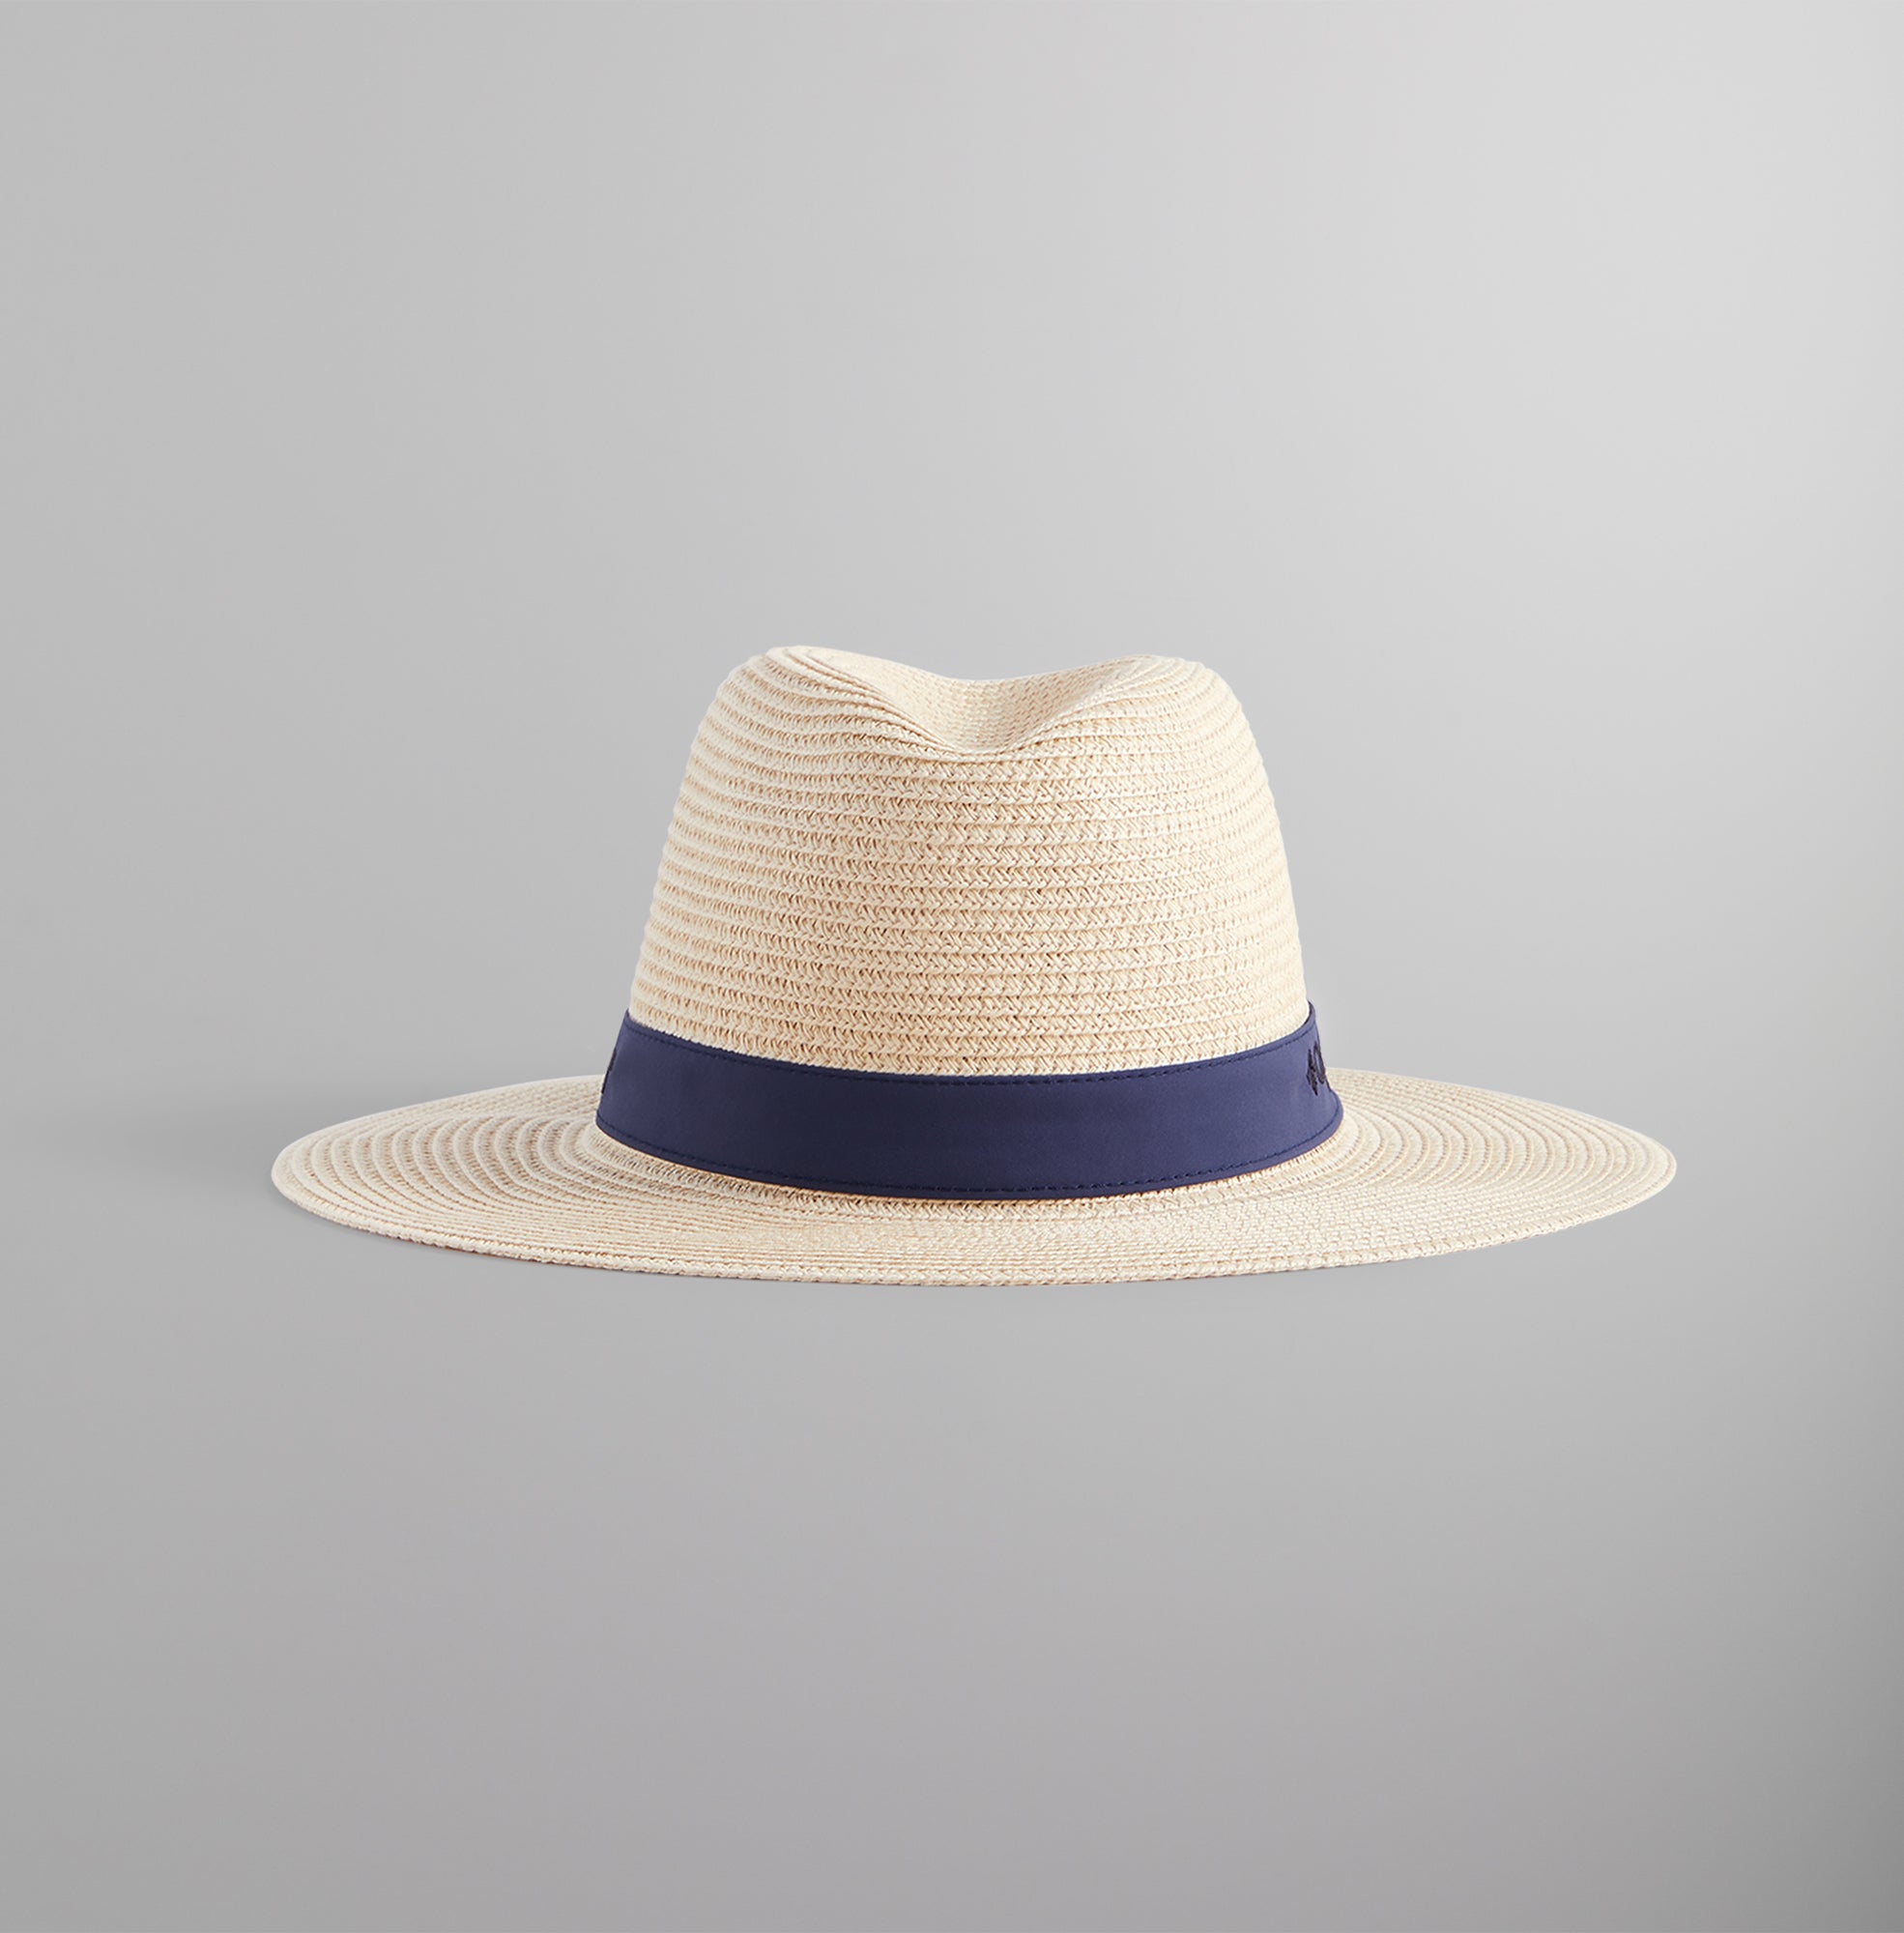 Kith for Columbia PFG Bonehead Straw Hat - Nocturnal